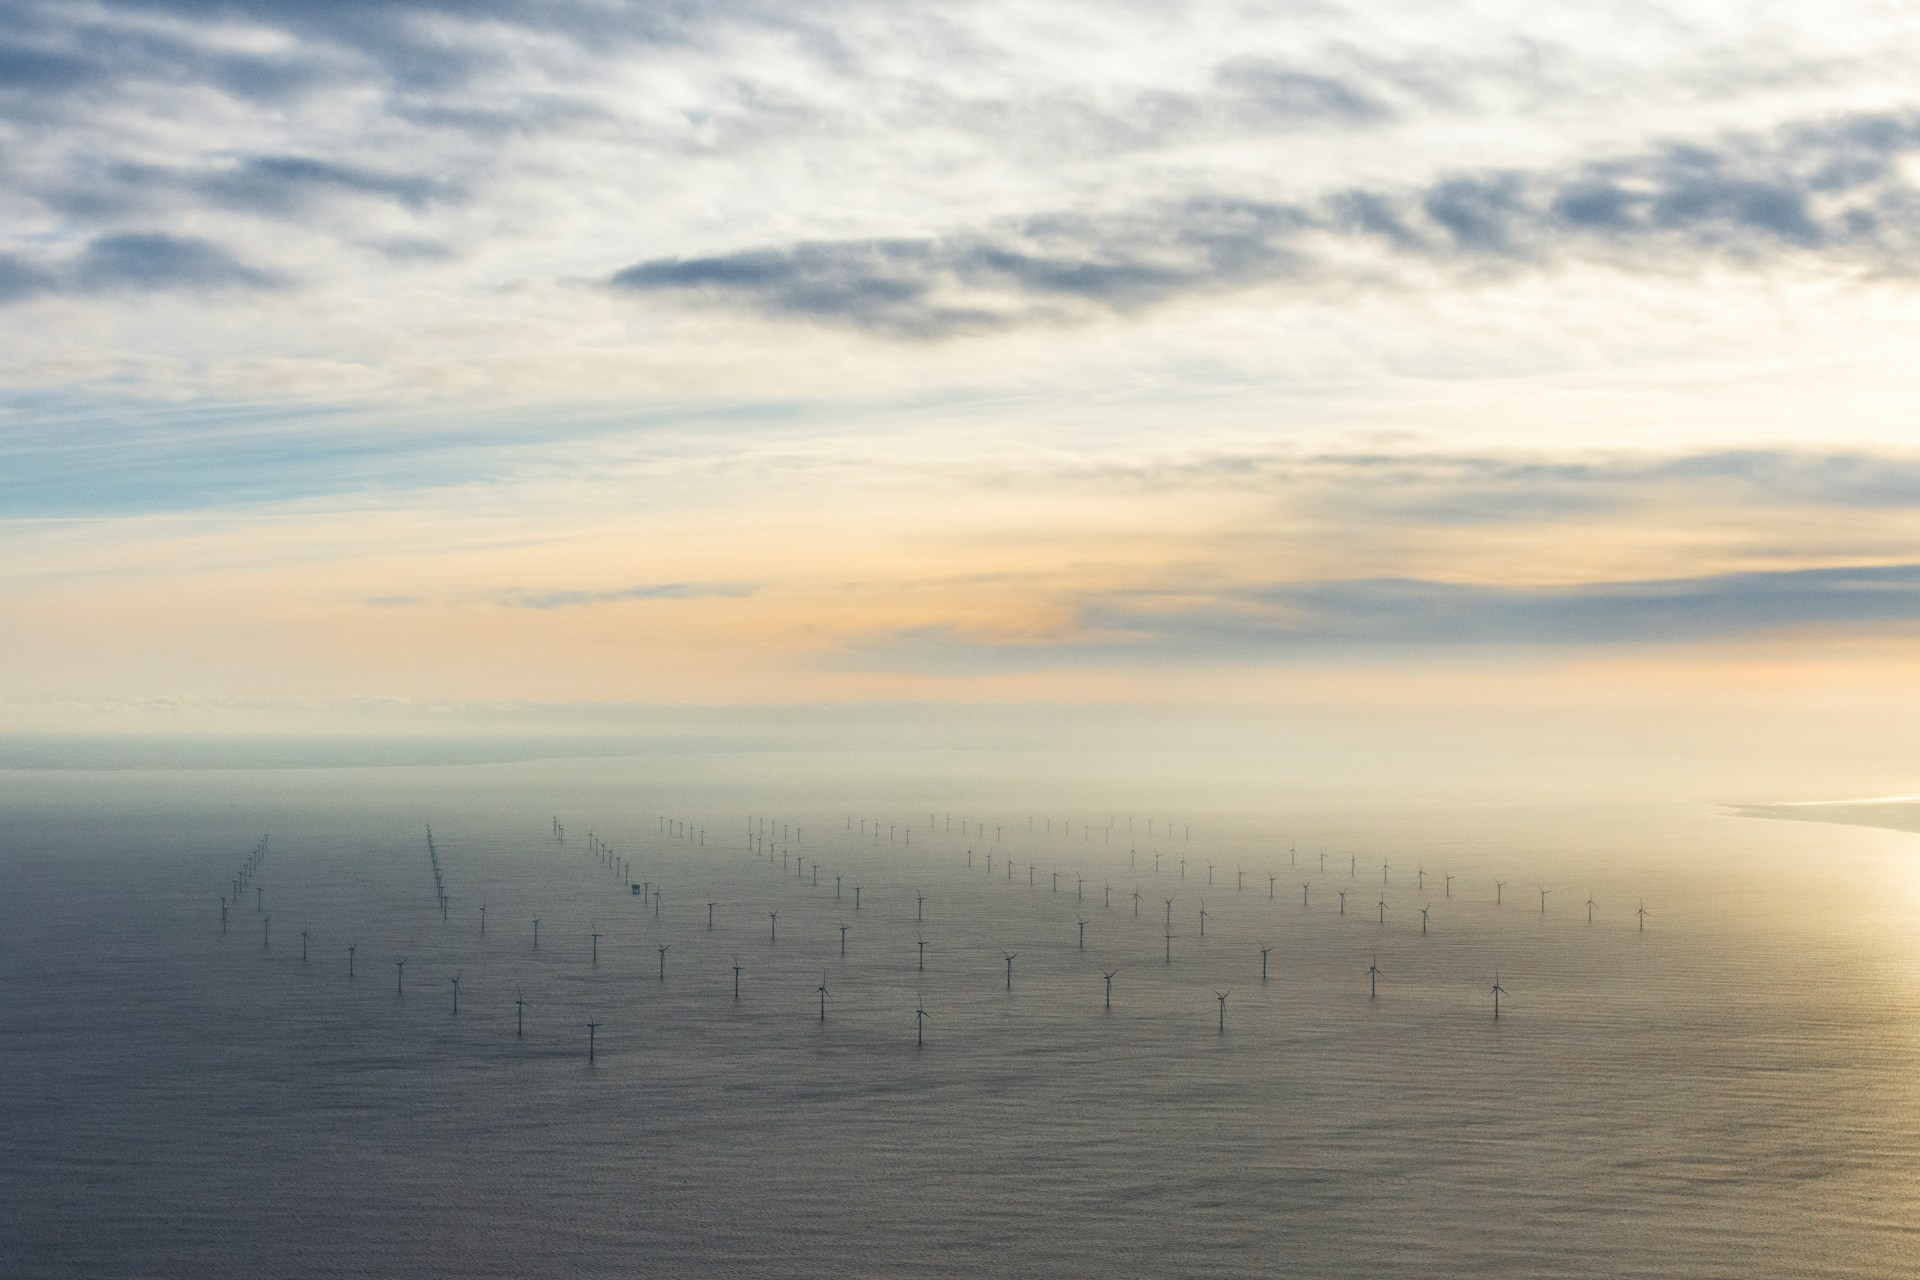 Europe's Drive for Offshore Wind Faces Supply Chain Complexity